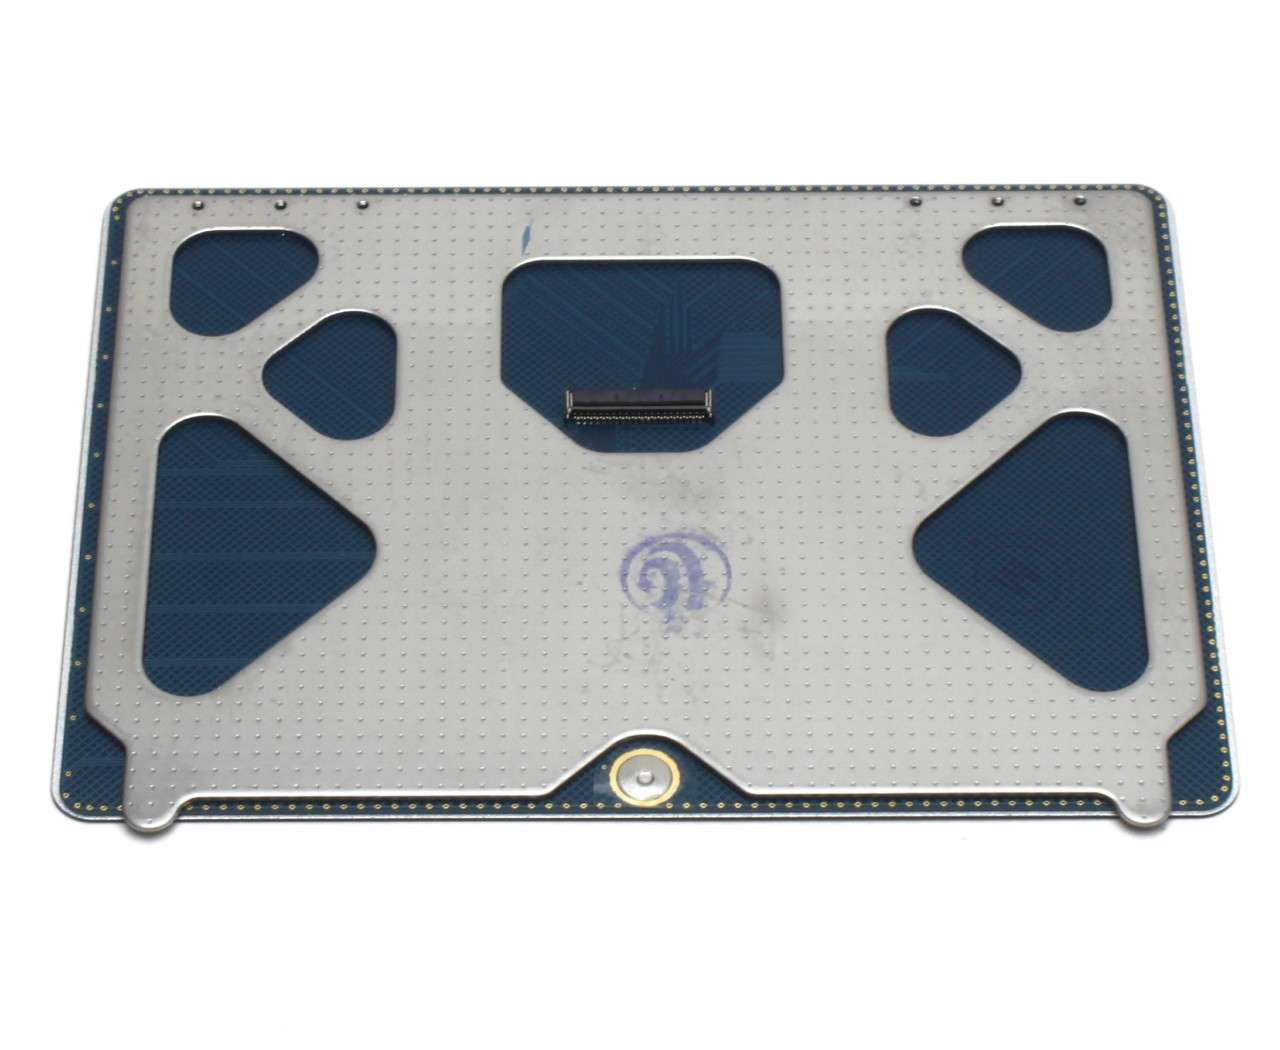 Touchpad Apple Macbook Pro Unibody 13 A1278 Mid 2010 Trackpad image0